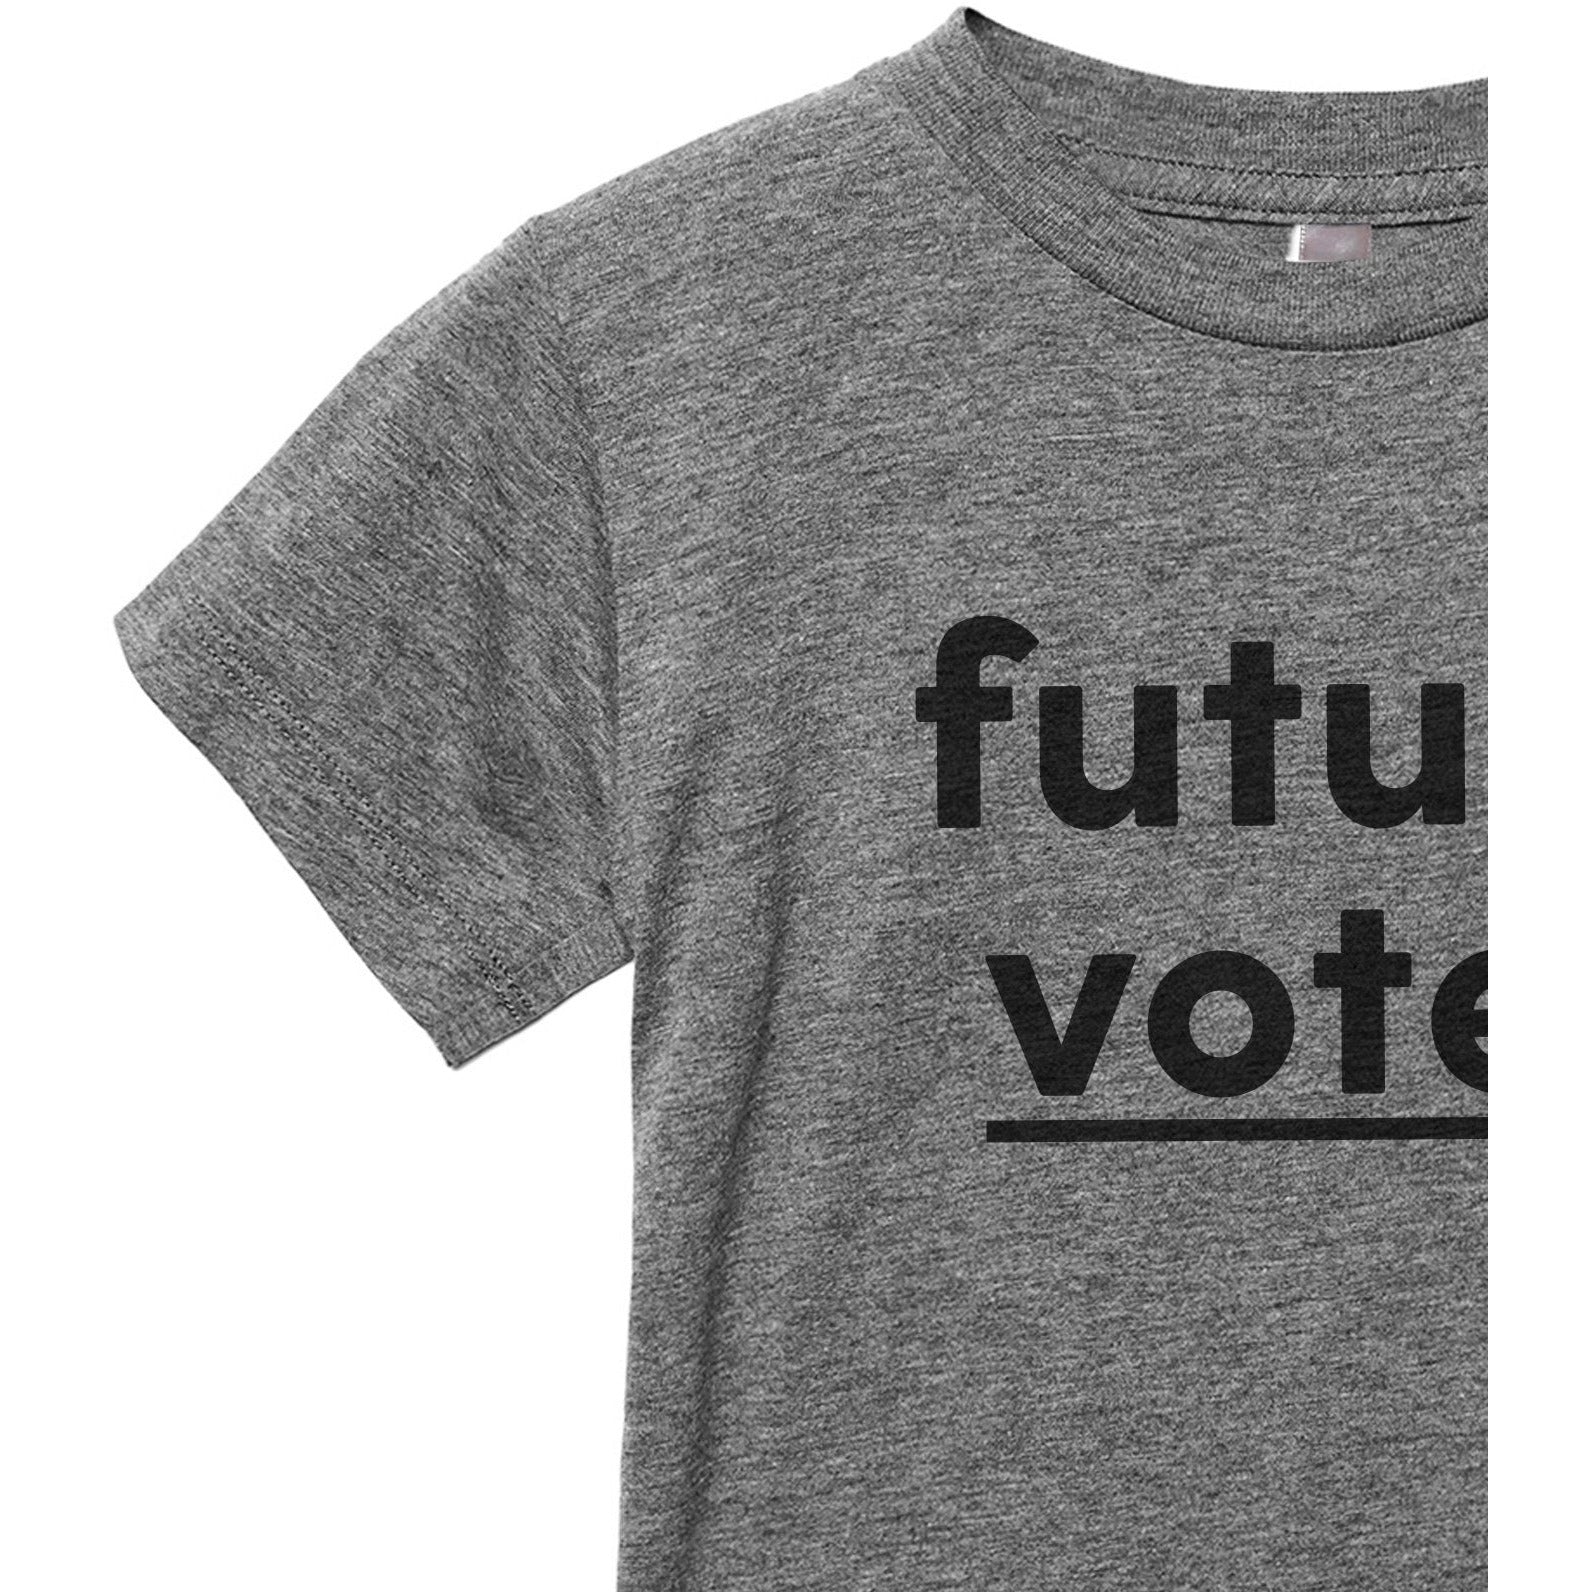 Future Voter Toddler's Go-To Crewneck Tee Heather Grey Close Up Sleeves Collar Details
